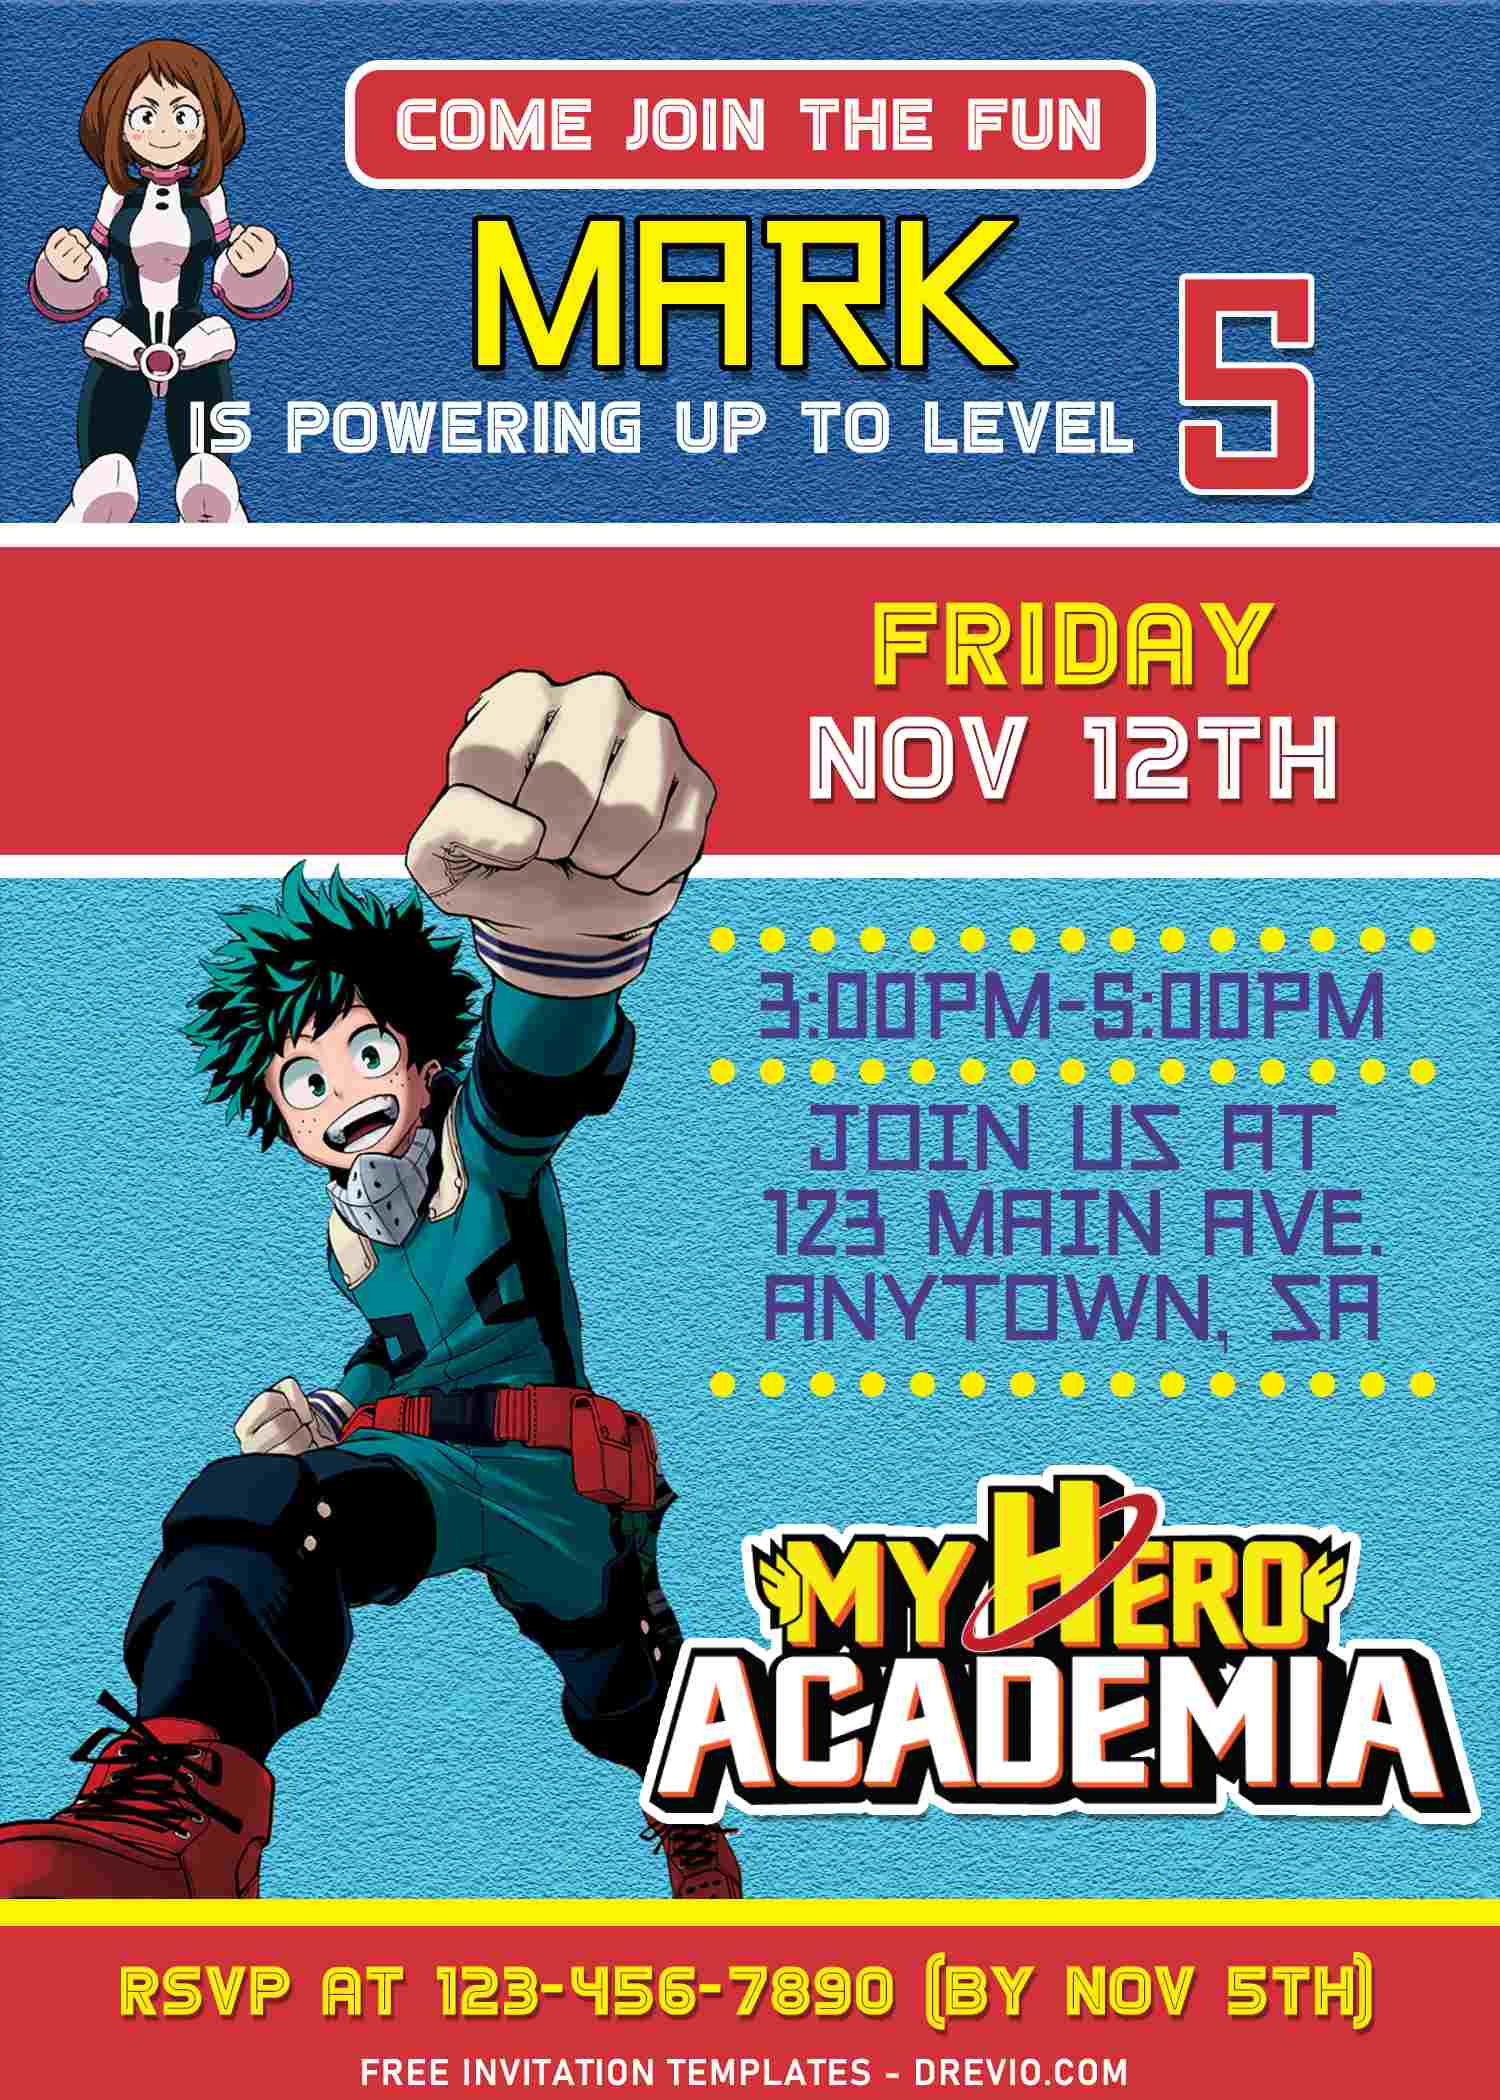 9+ Epic My Hero Academia Birthday Invitation Templates For Anime Lovers |  Download Hundreds FREE PRINTABLE Birthday Invitation Templates